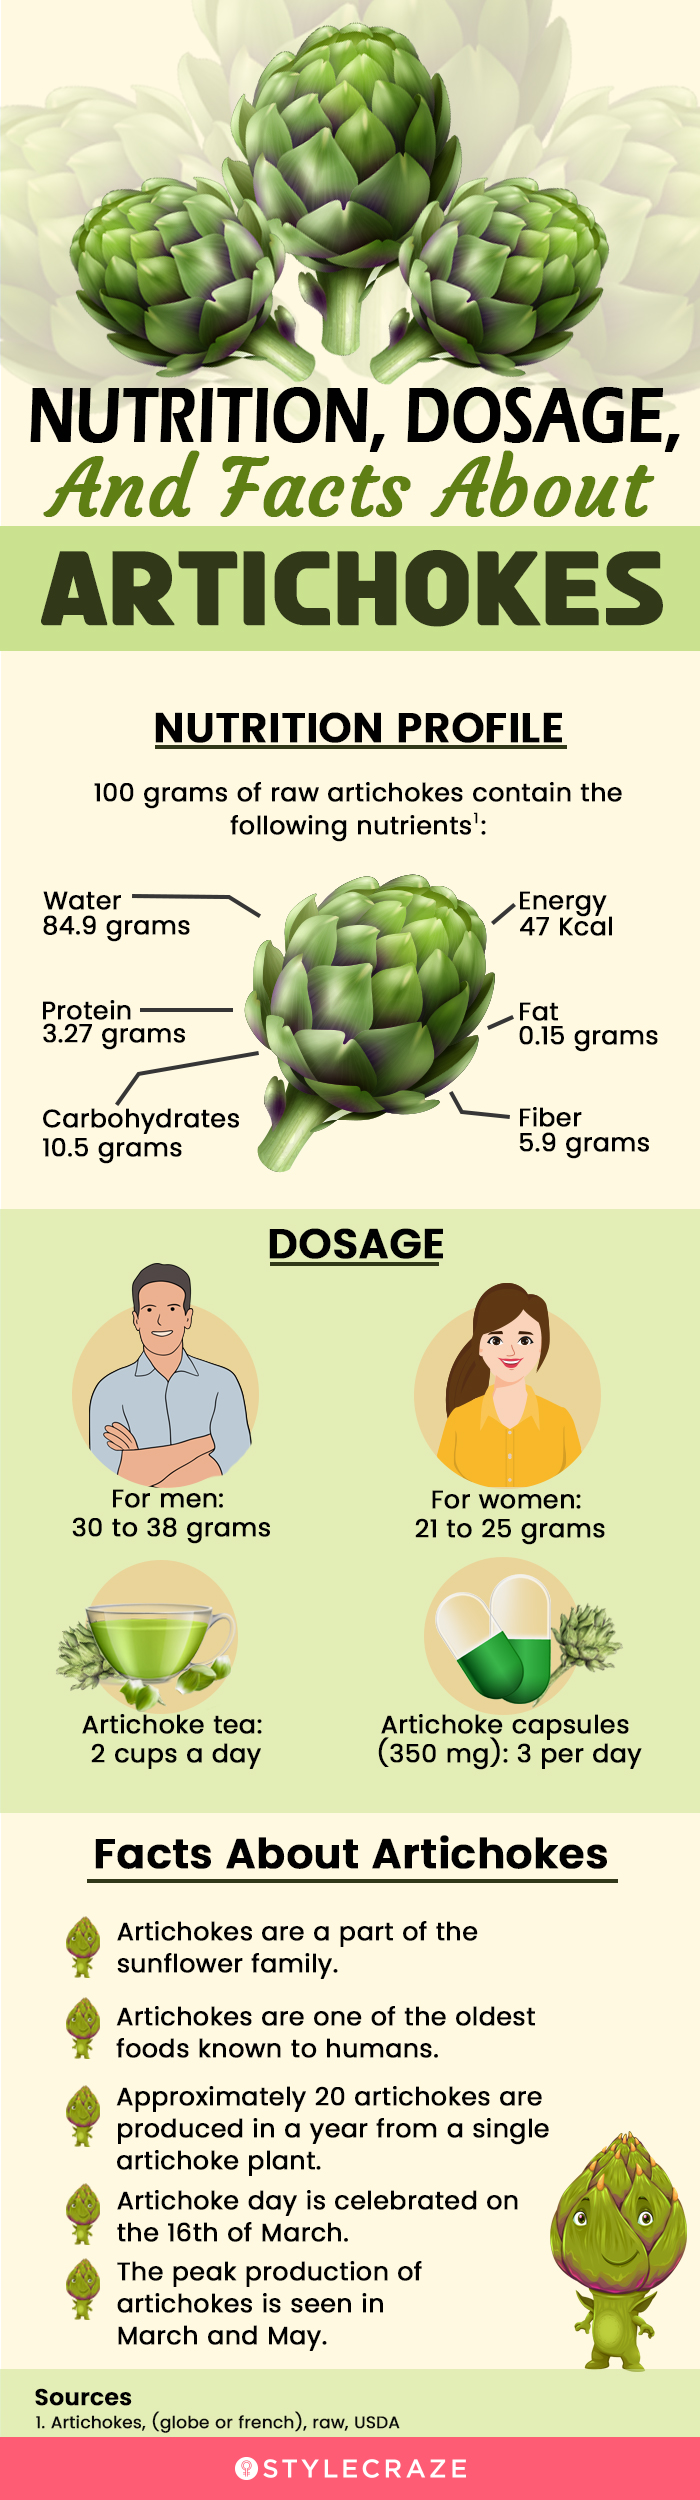 nutrition, dosage, and facts about artichokes [infographic]